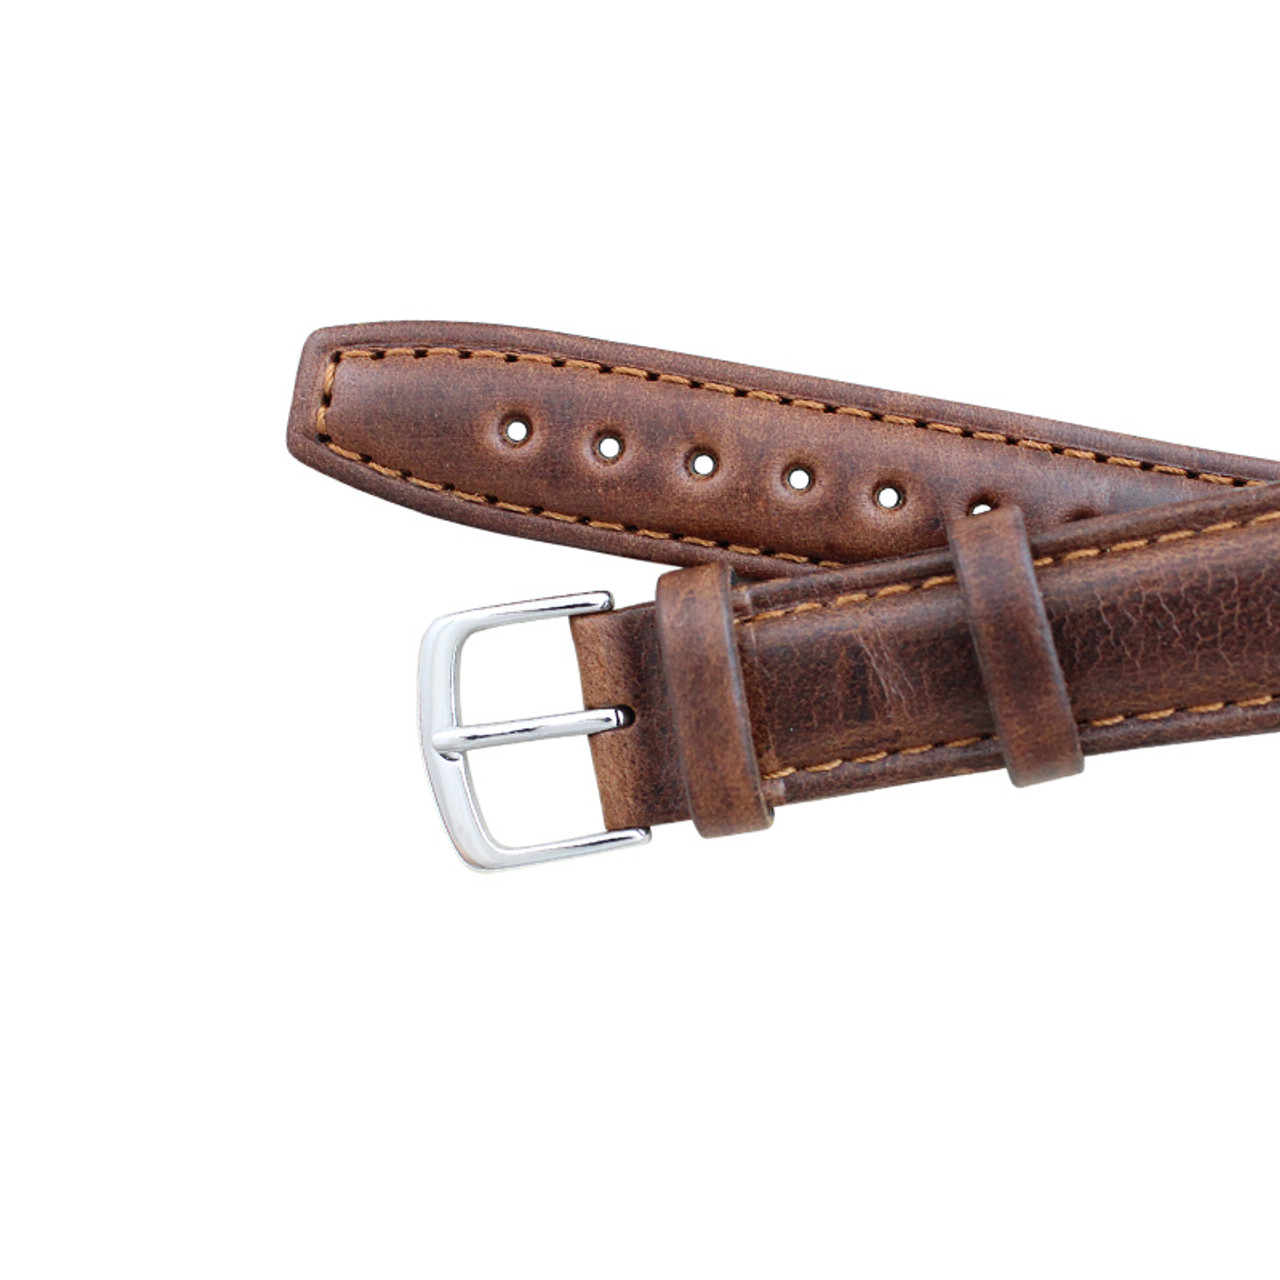 Short Length Leather Watch Strap